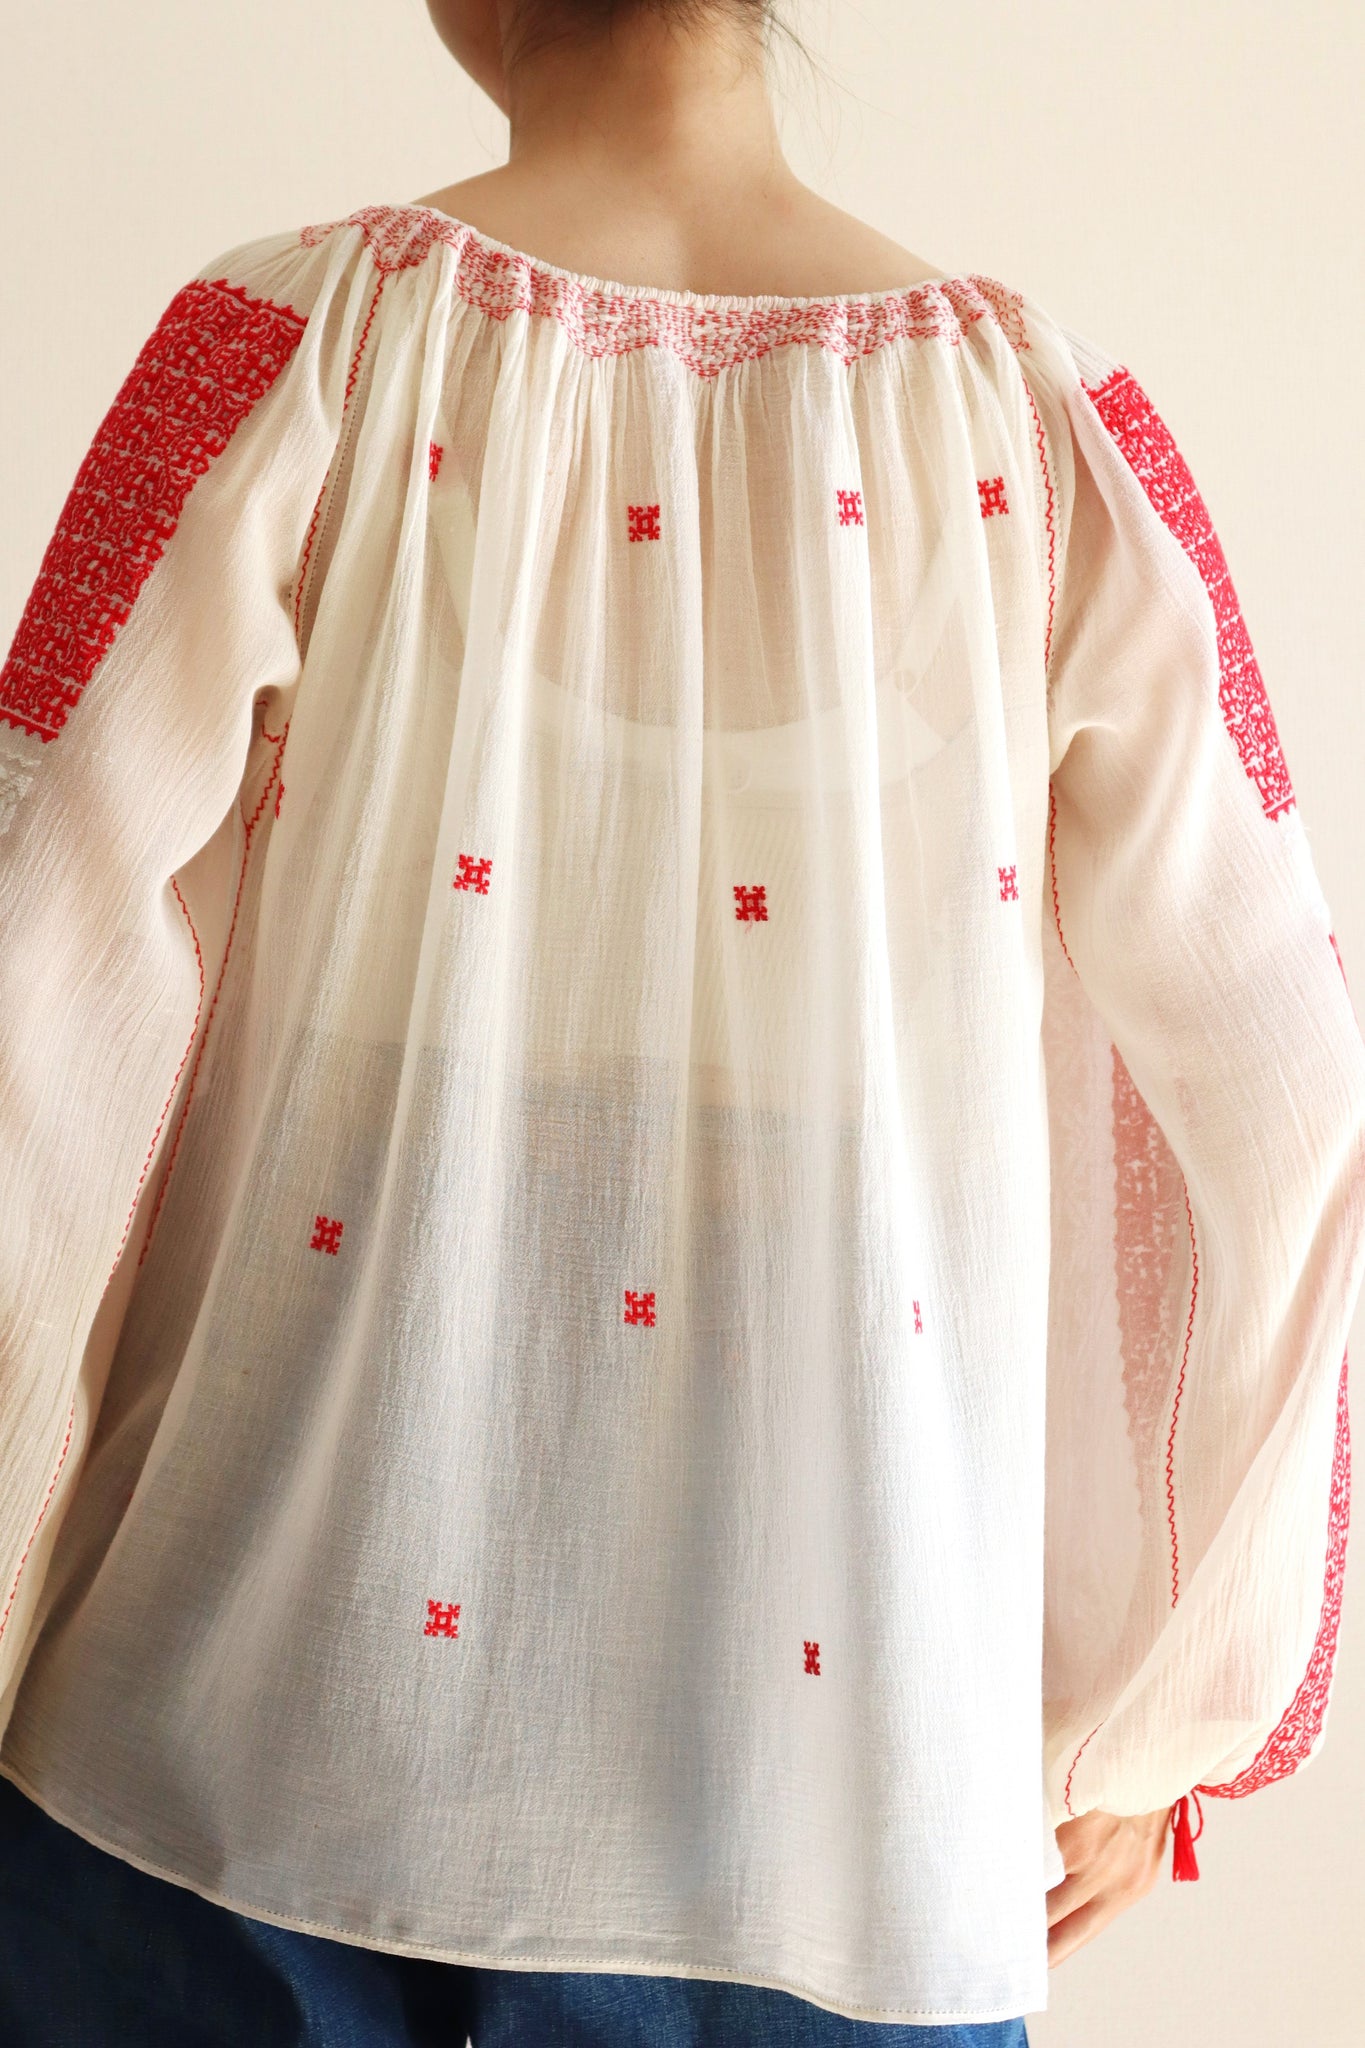 1940s Red Embroidery Romanian Blouse